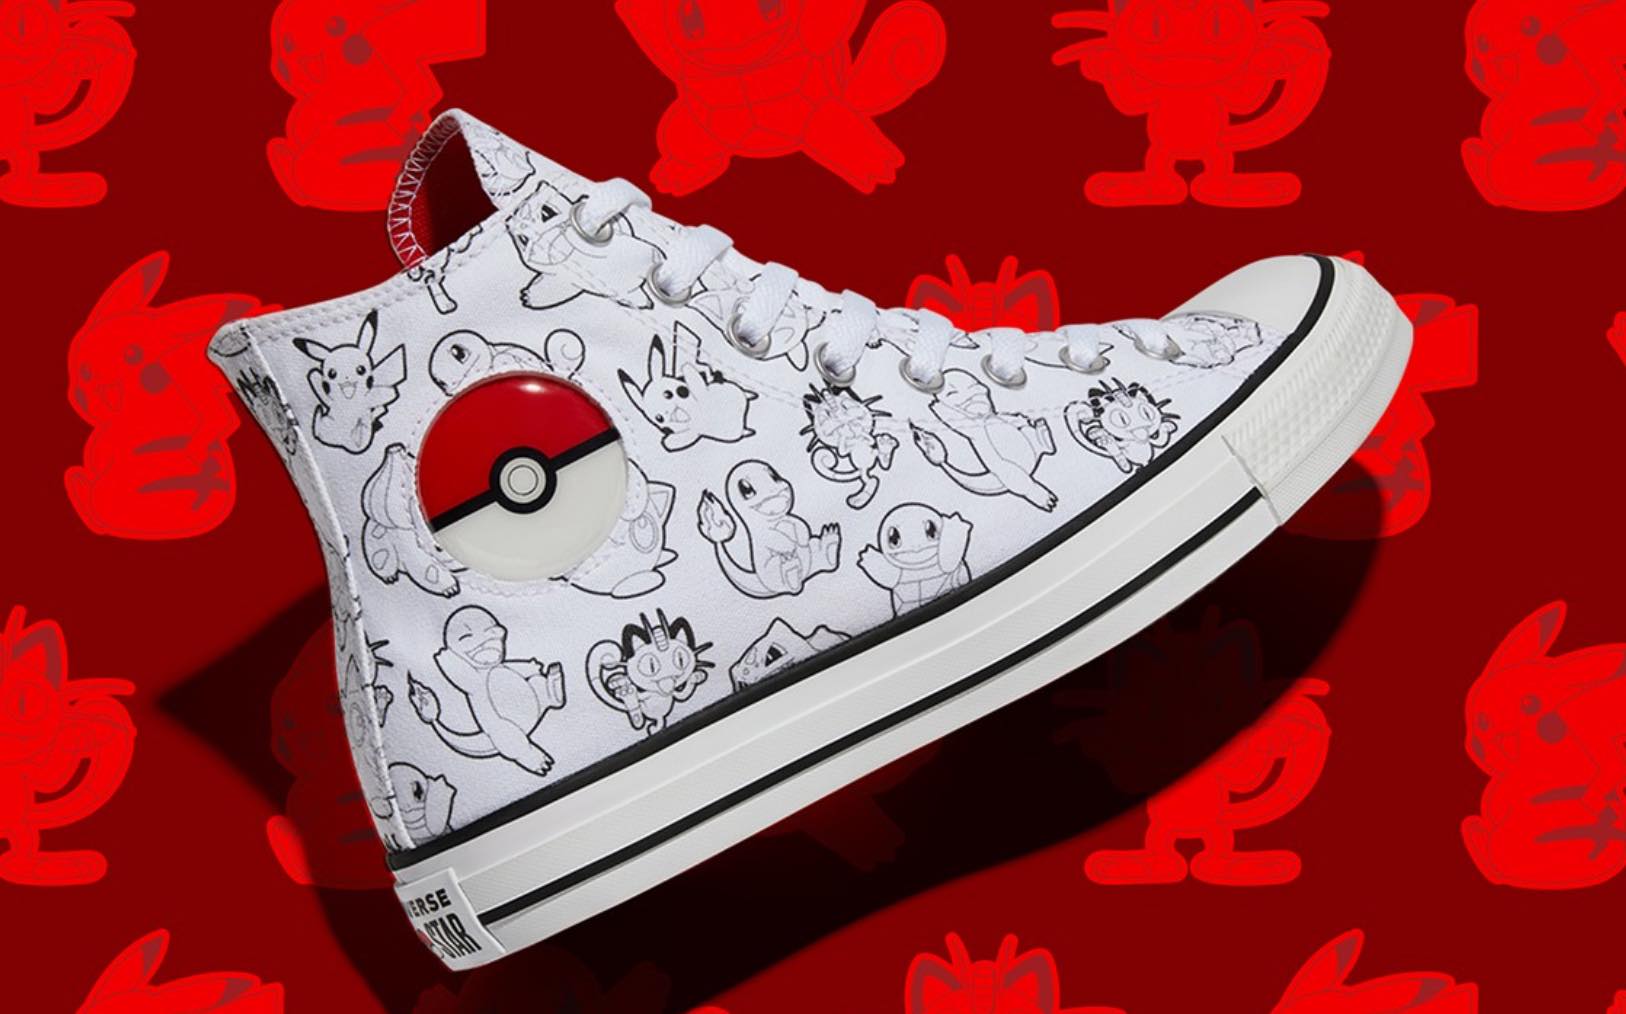 One Converse shoe featuring black drawings of Pokemon on white fabric with a pokeball on the ankle area. The shoe is shown on a red tinted repeating background of Pikachu and other Pokemon